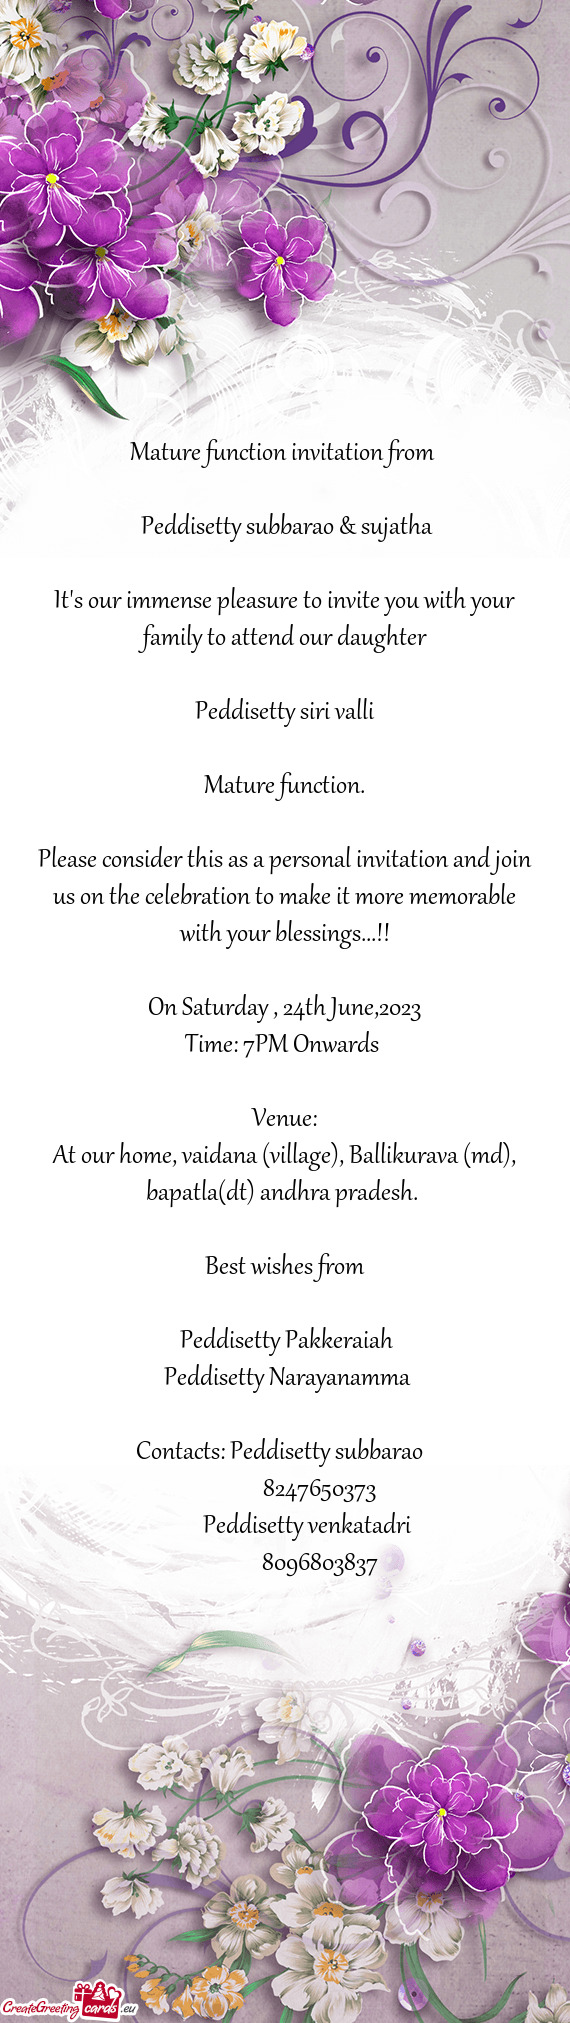 Mature function invitation from